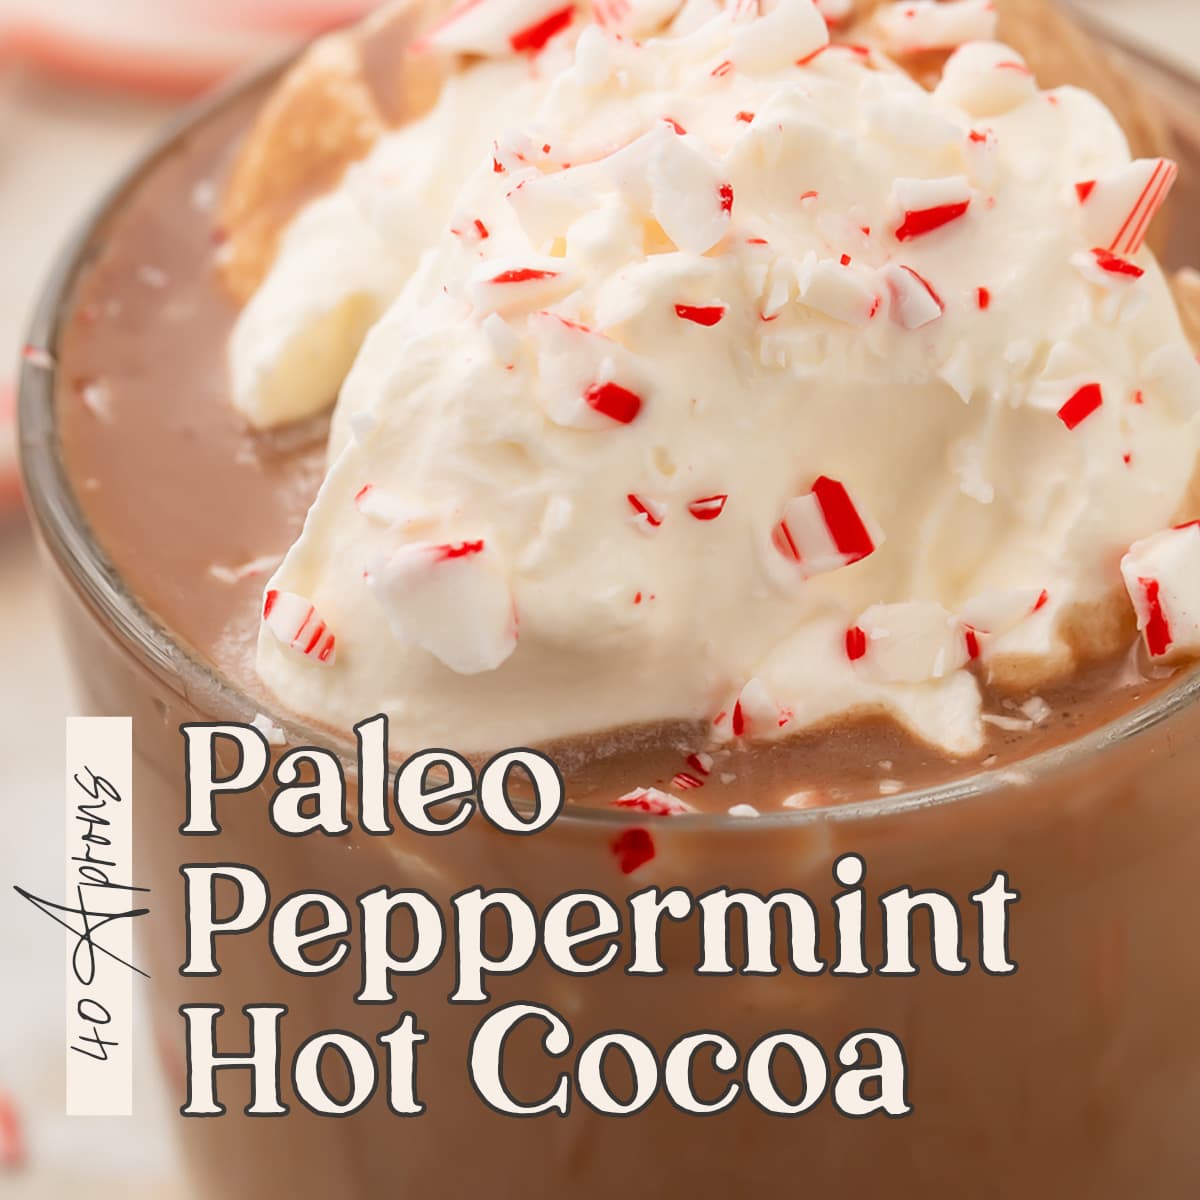 Pin graphic for paleo peppermint hot chocolate.